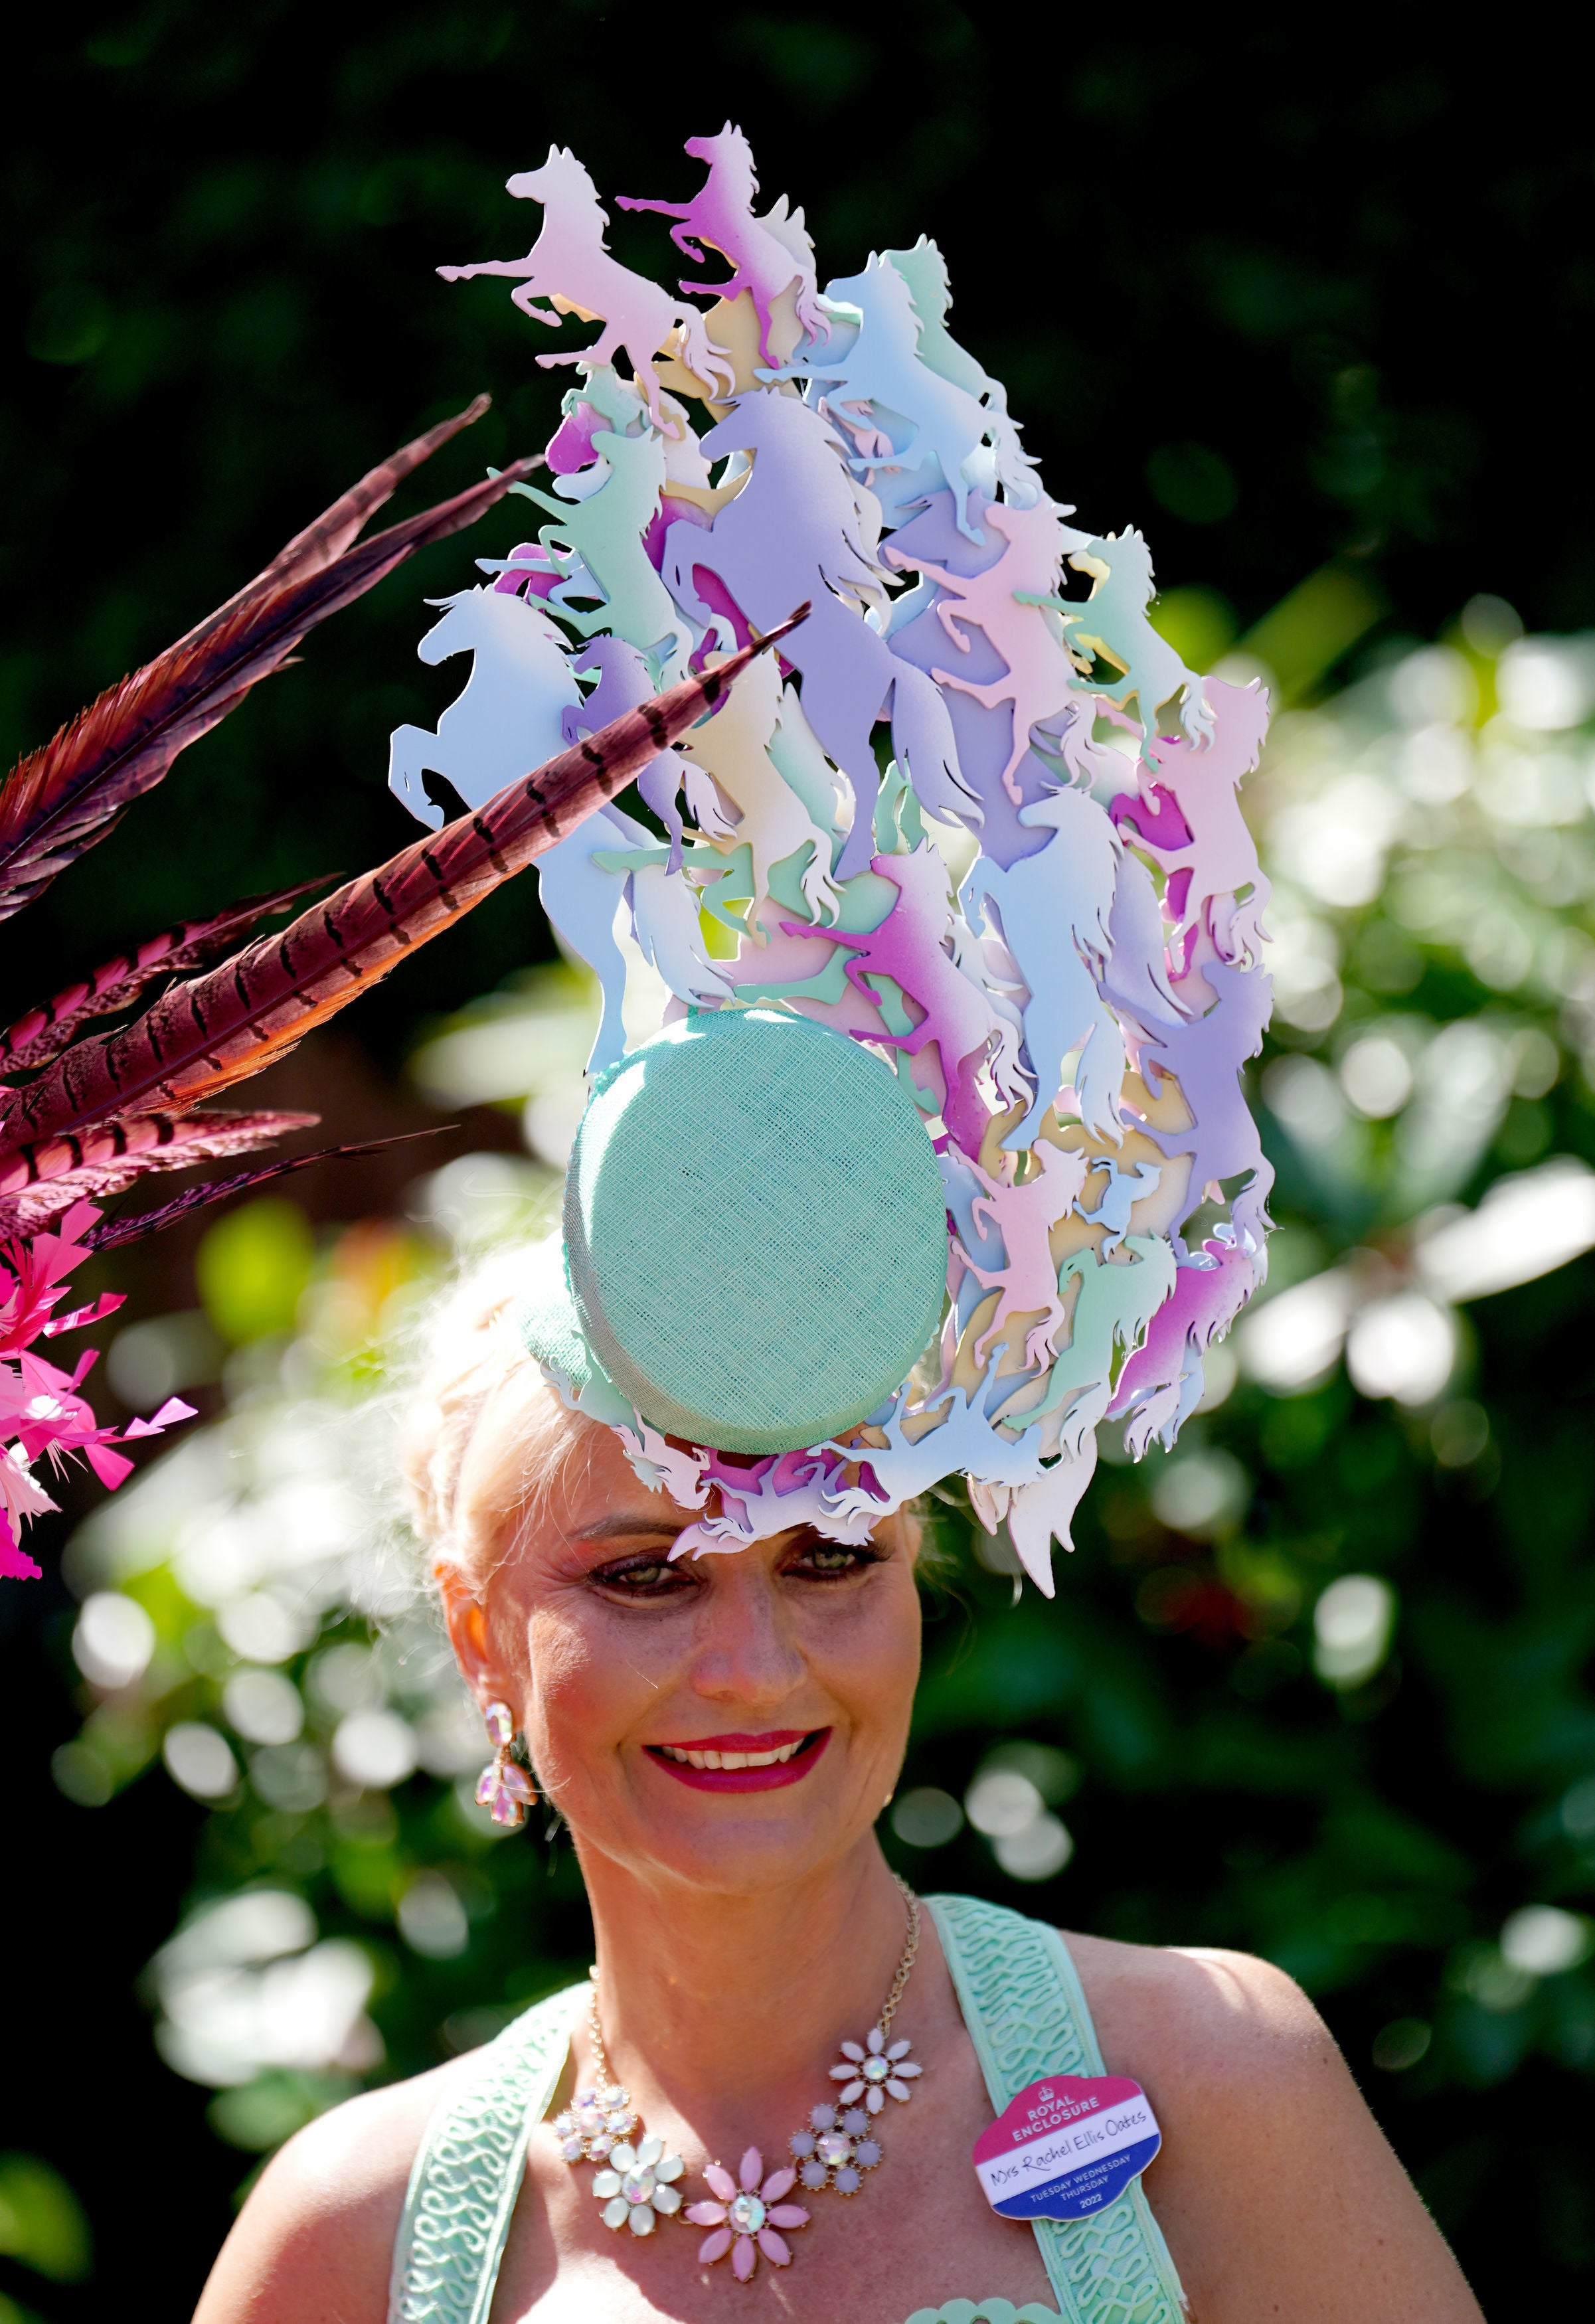 Rachel Ellis Oates arriving ahead of racing on day two of Royal Ascot at Ascot Racecourse